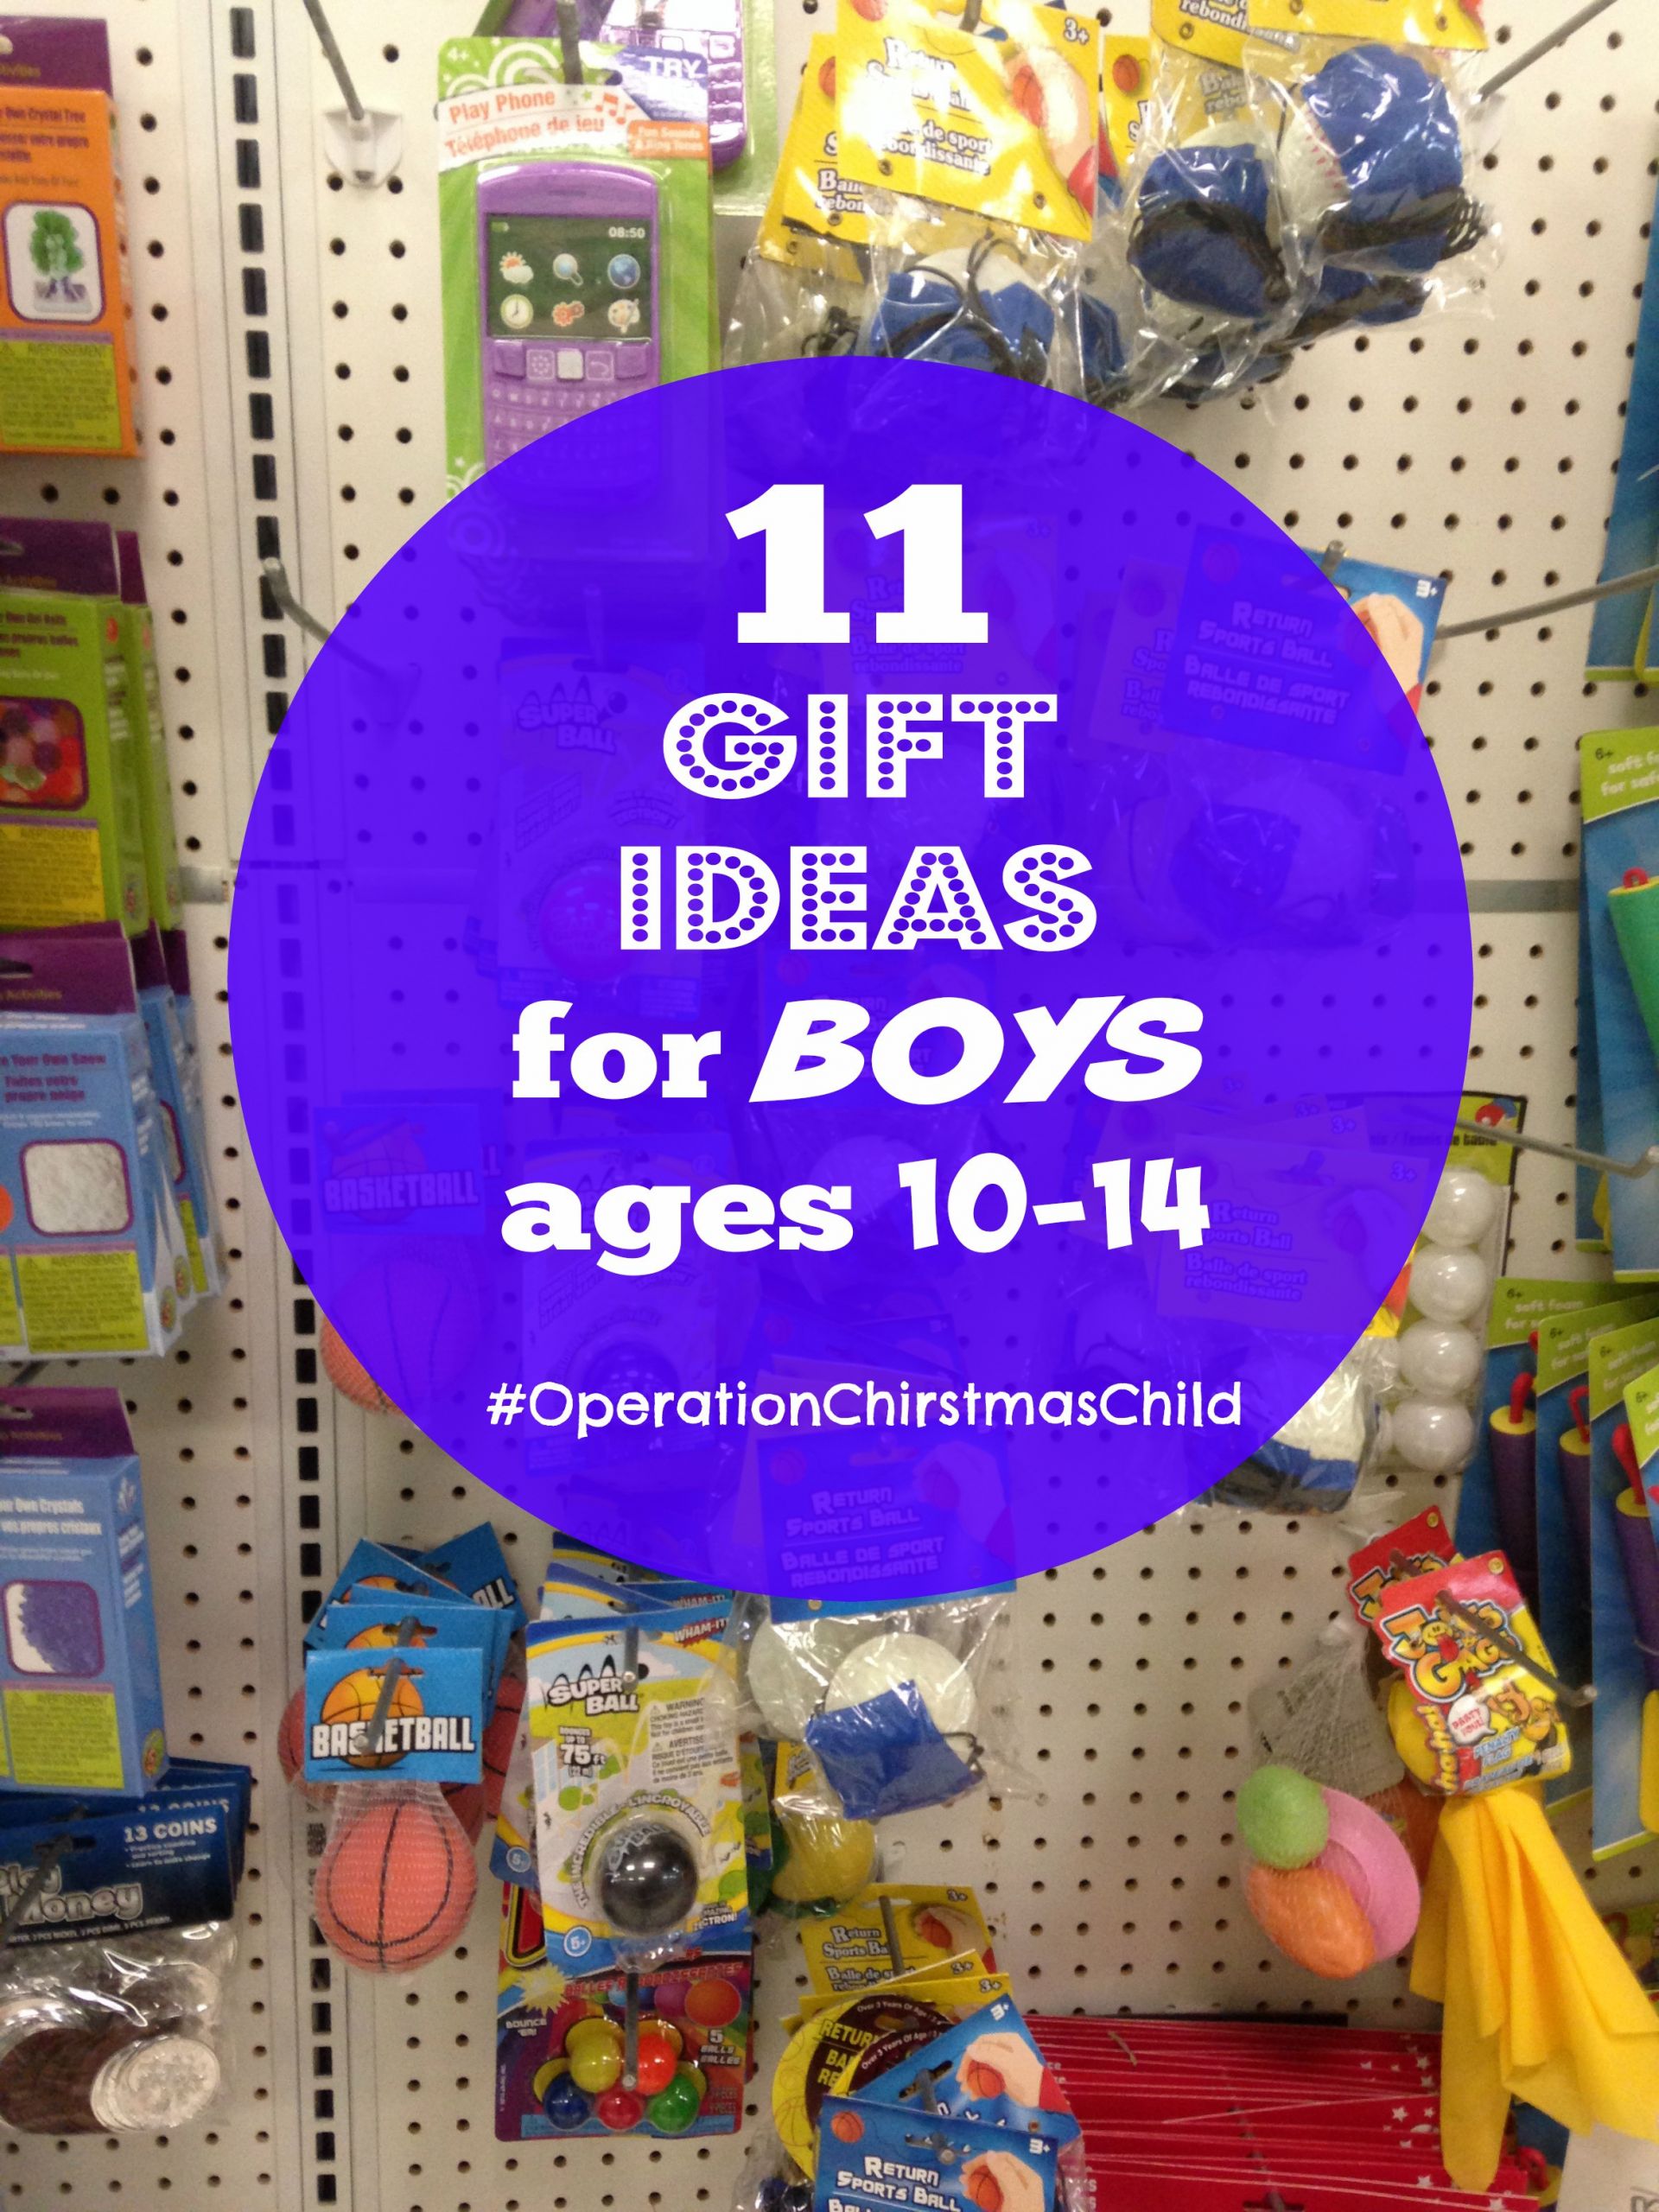 Valentine Gift Ideas For 10 Year Old Boy
 Eleven Gift Ideas for Boys ages 10 14 Operation Christmas